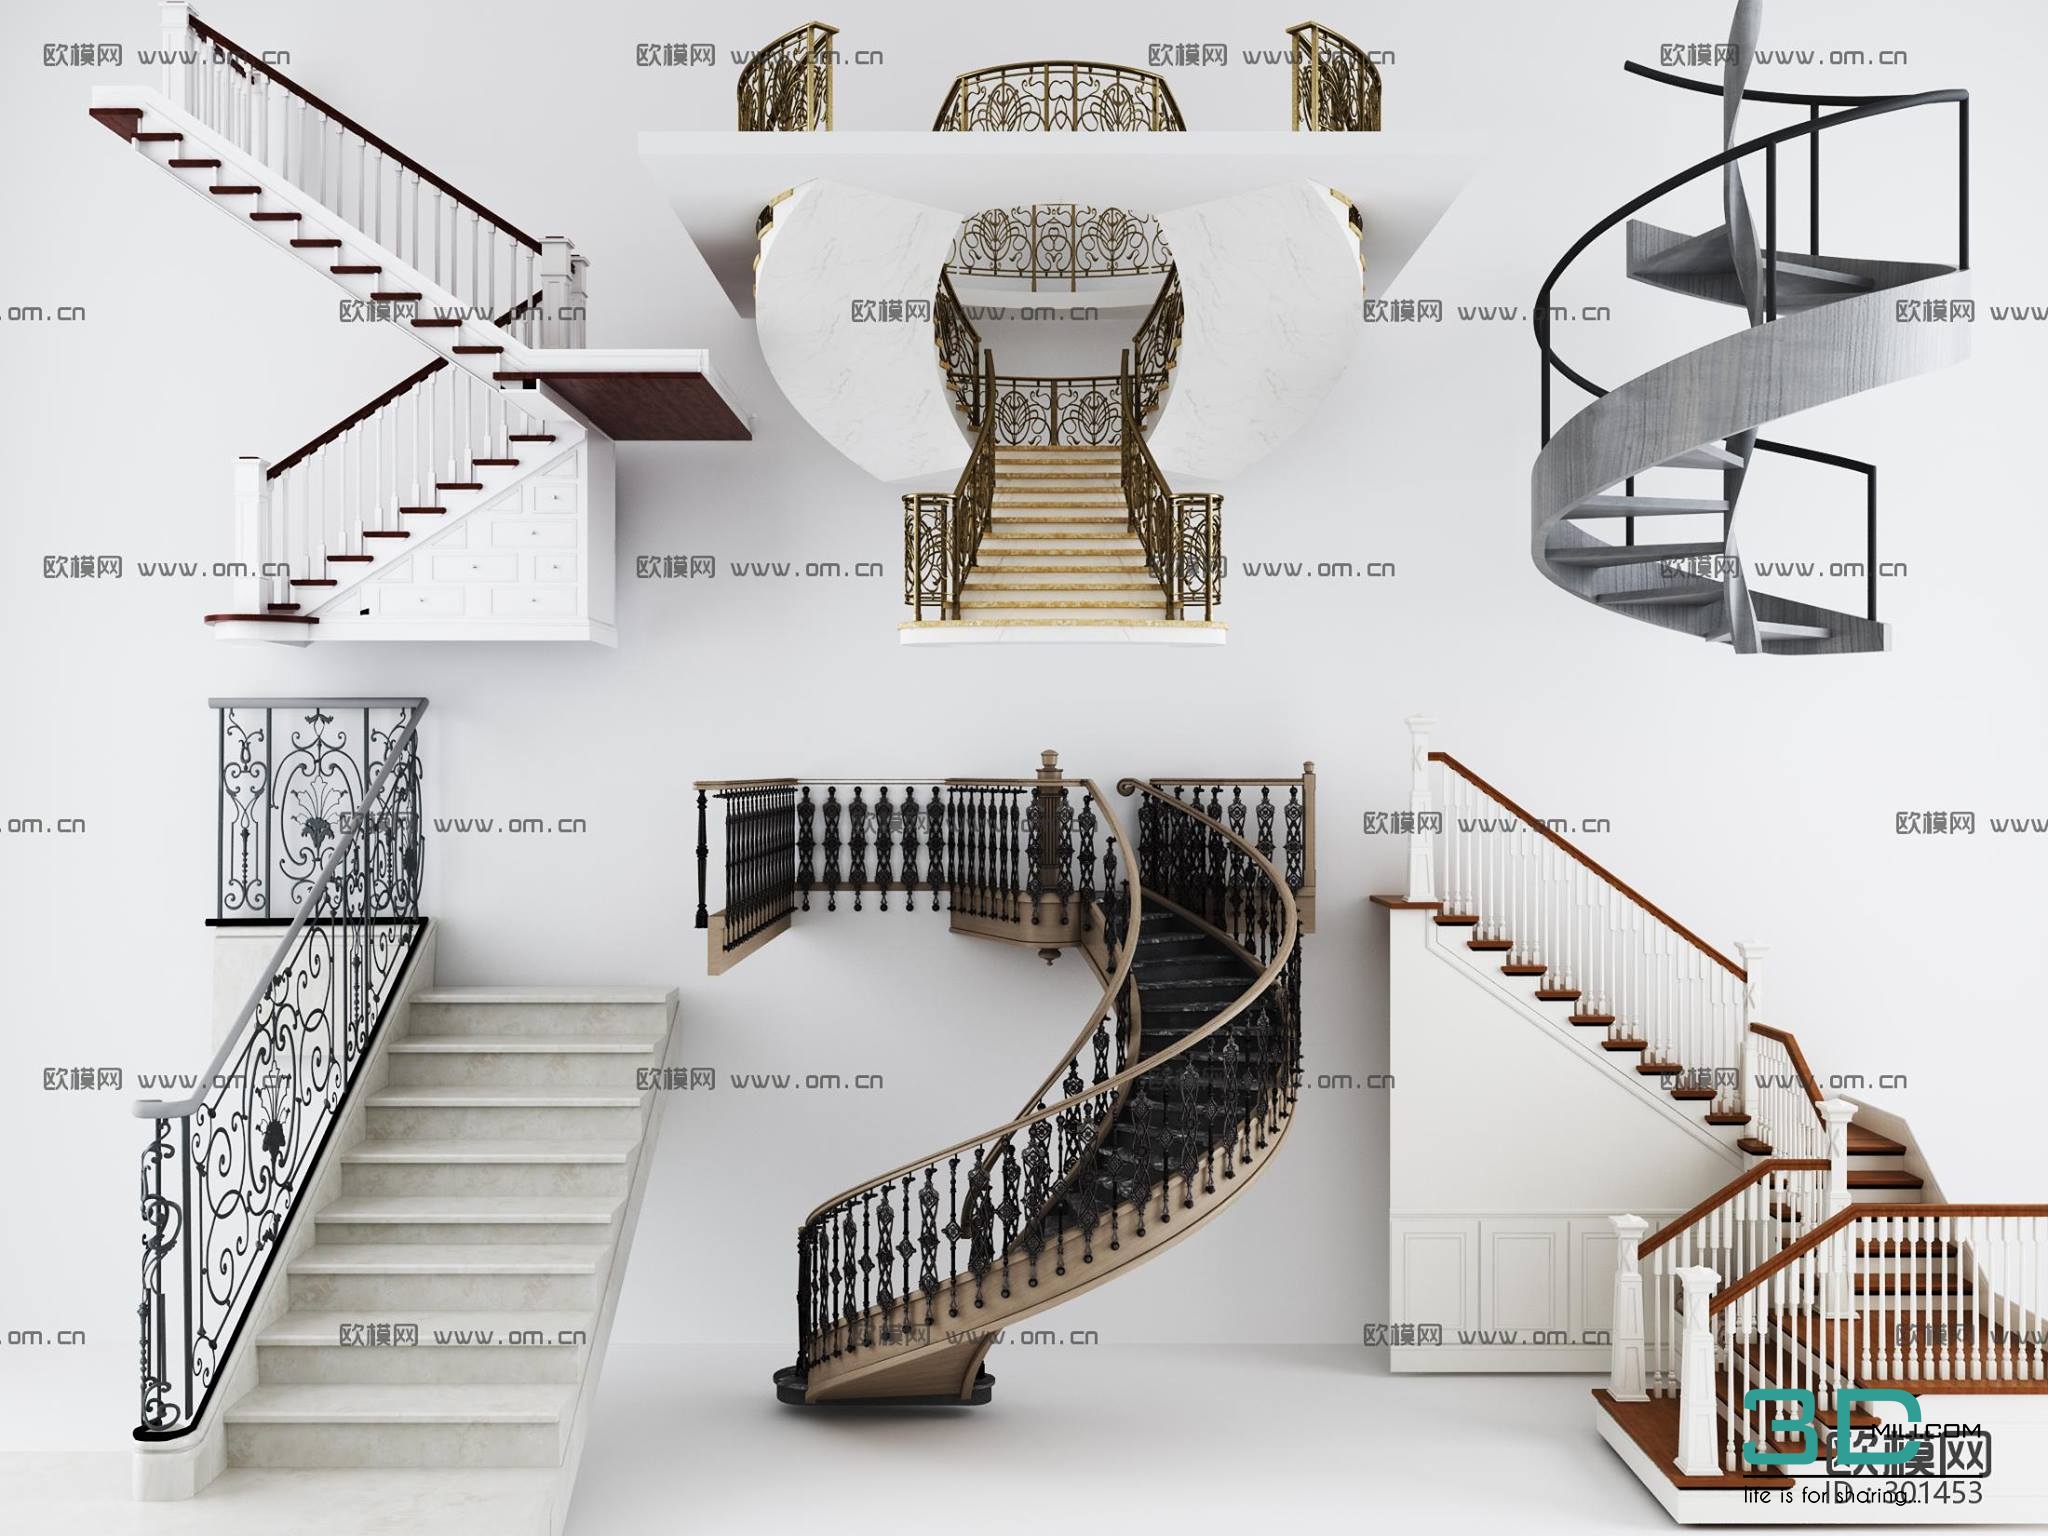 67 Staircase 3d Model Free Download 3dmili 2020 Download 3d